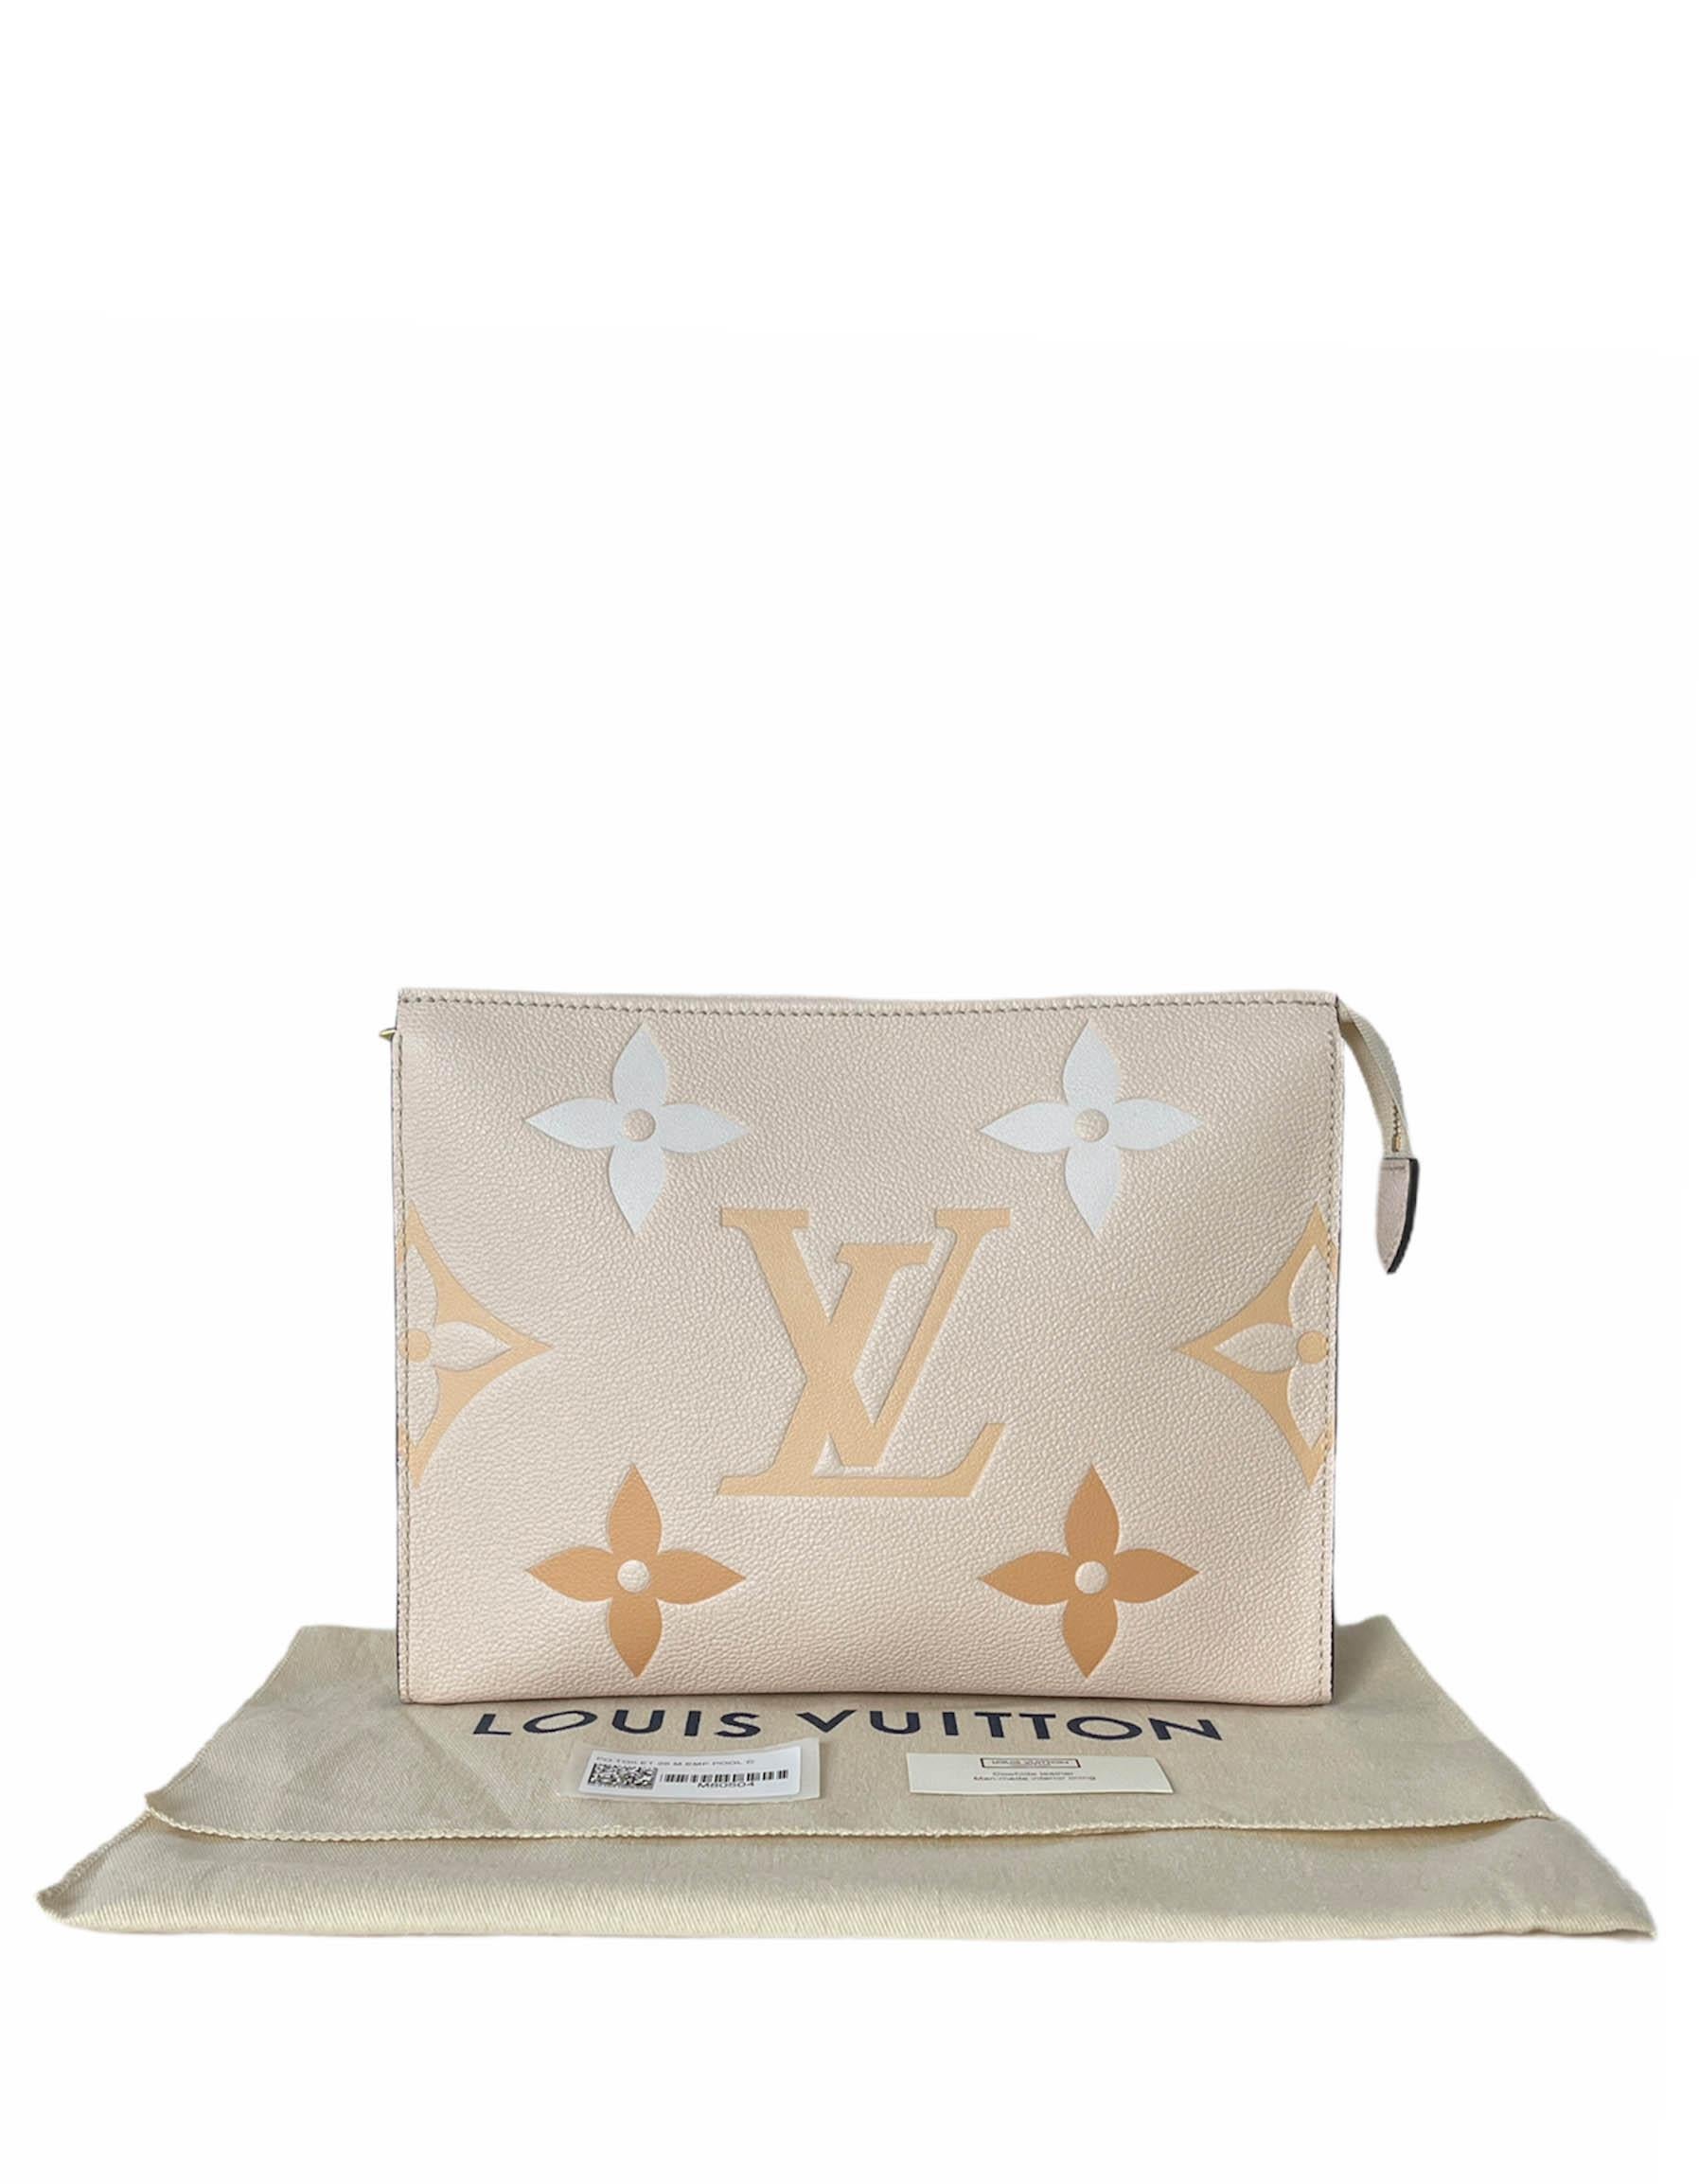 Louis Vuitton 2021 Cream Saffron Empreinte Monogram Giant By The Pool Toiletry Pouch 26

Year of Production: 2021
Made in: France
Color: Saffron cream
Hardware: Goldtone
Materials: Embossed cowhide leather
Closure/Opening: Zip top
Exterior